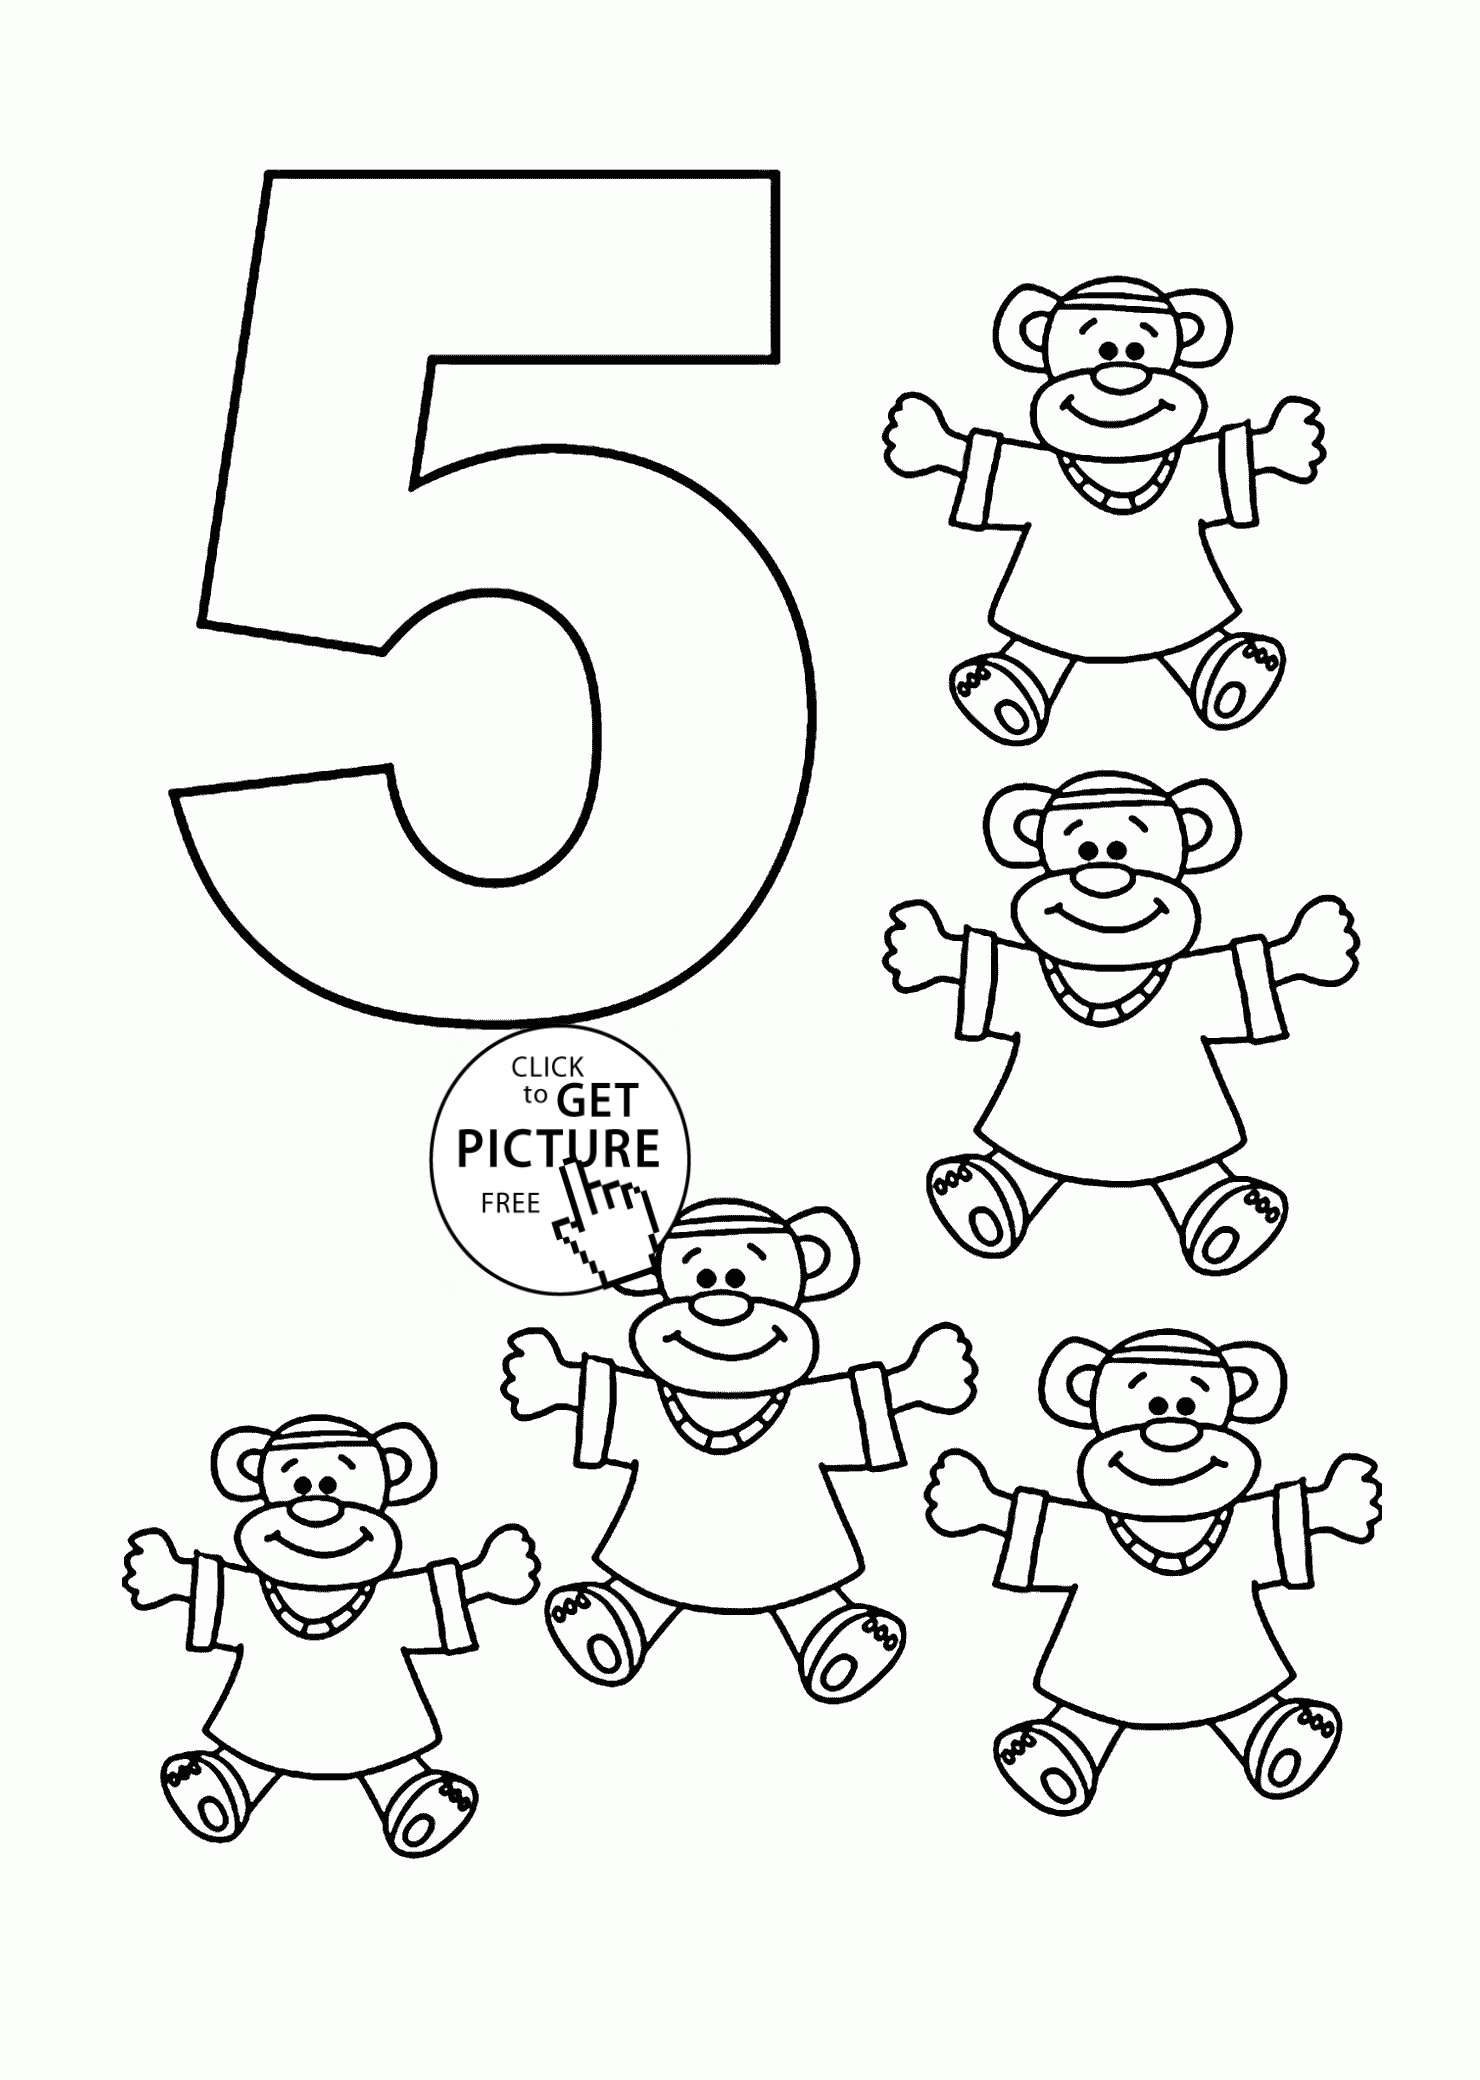 number 5 coloring sheet number 5 says five coloring page free printable coloring 5 sheet number coloring 